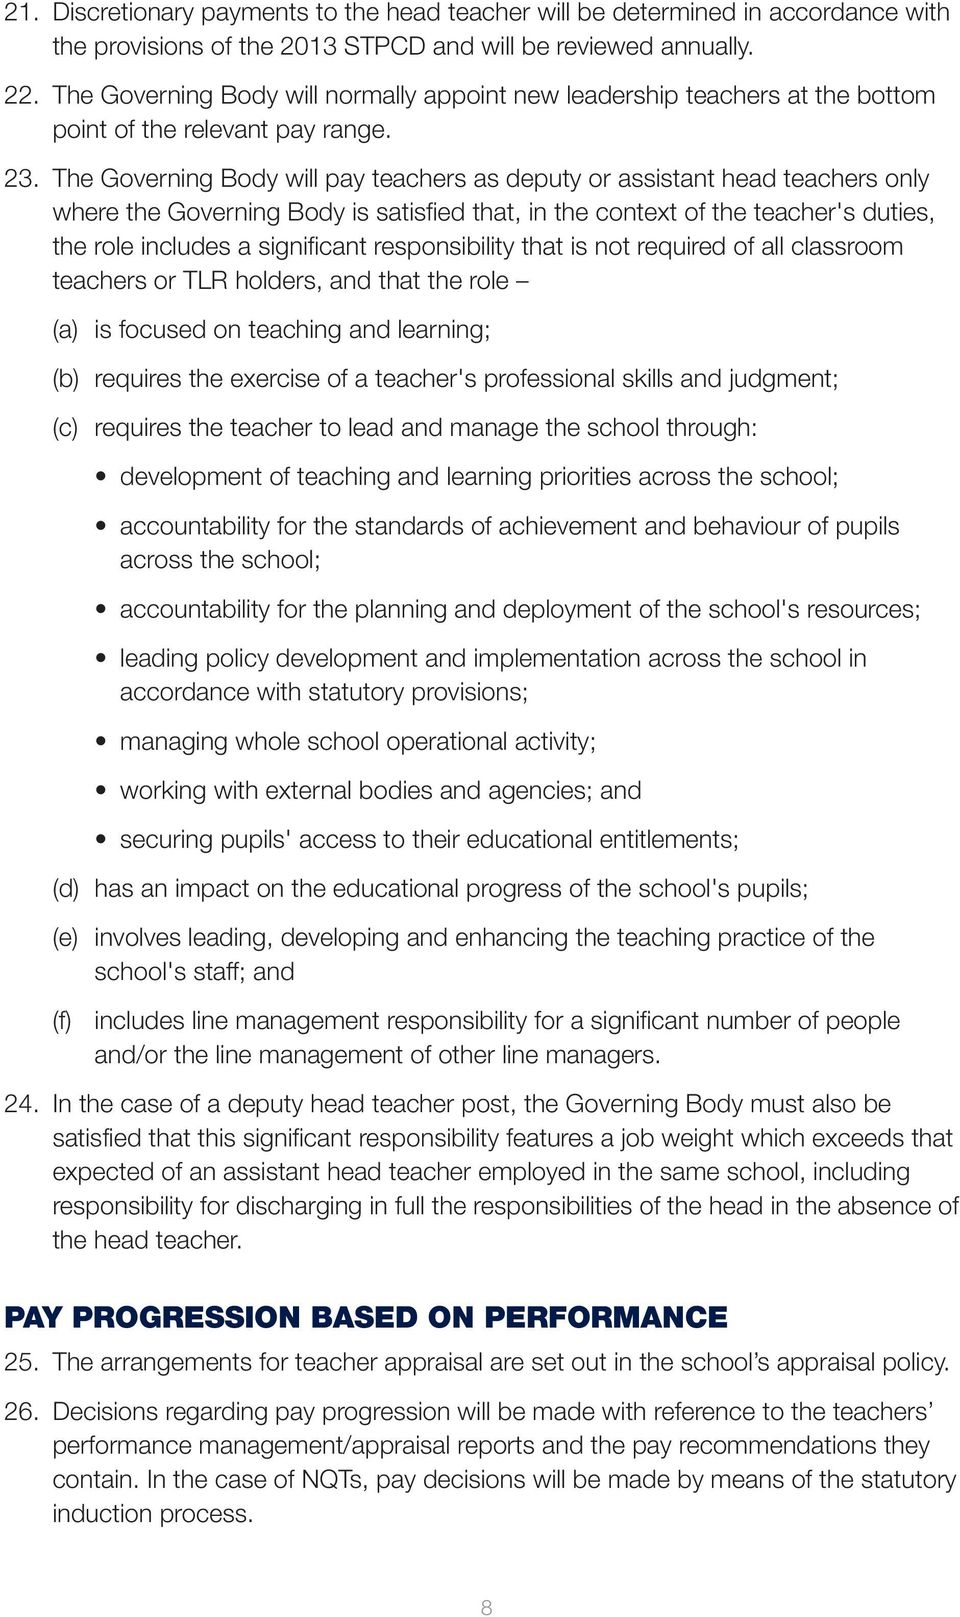 The Governing Body will pay teachers as deputy or assistant head teachers only where the Governing Body is satisfied that, in the context of the teacher's duties, the role includes a significant